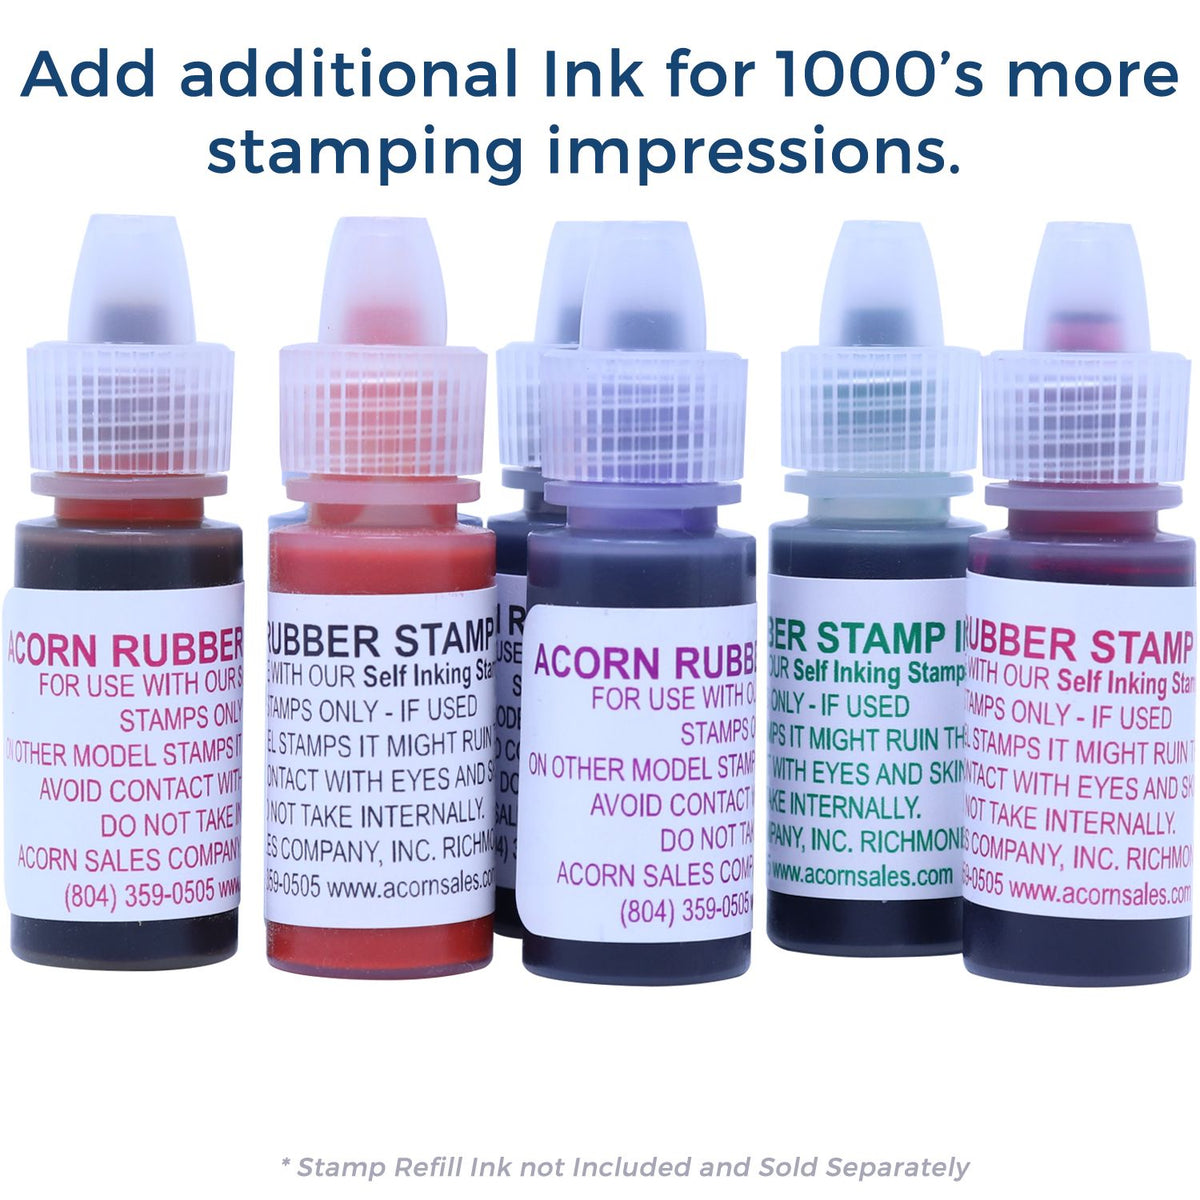 Refill Inks for Slim Pre-Inked Essential Job Stamp Available